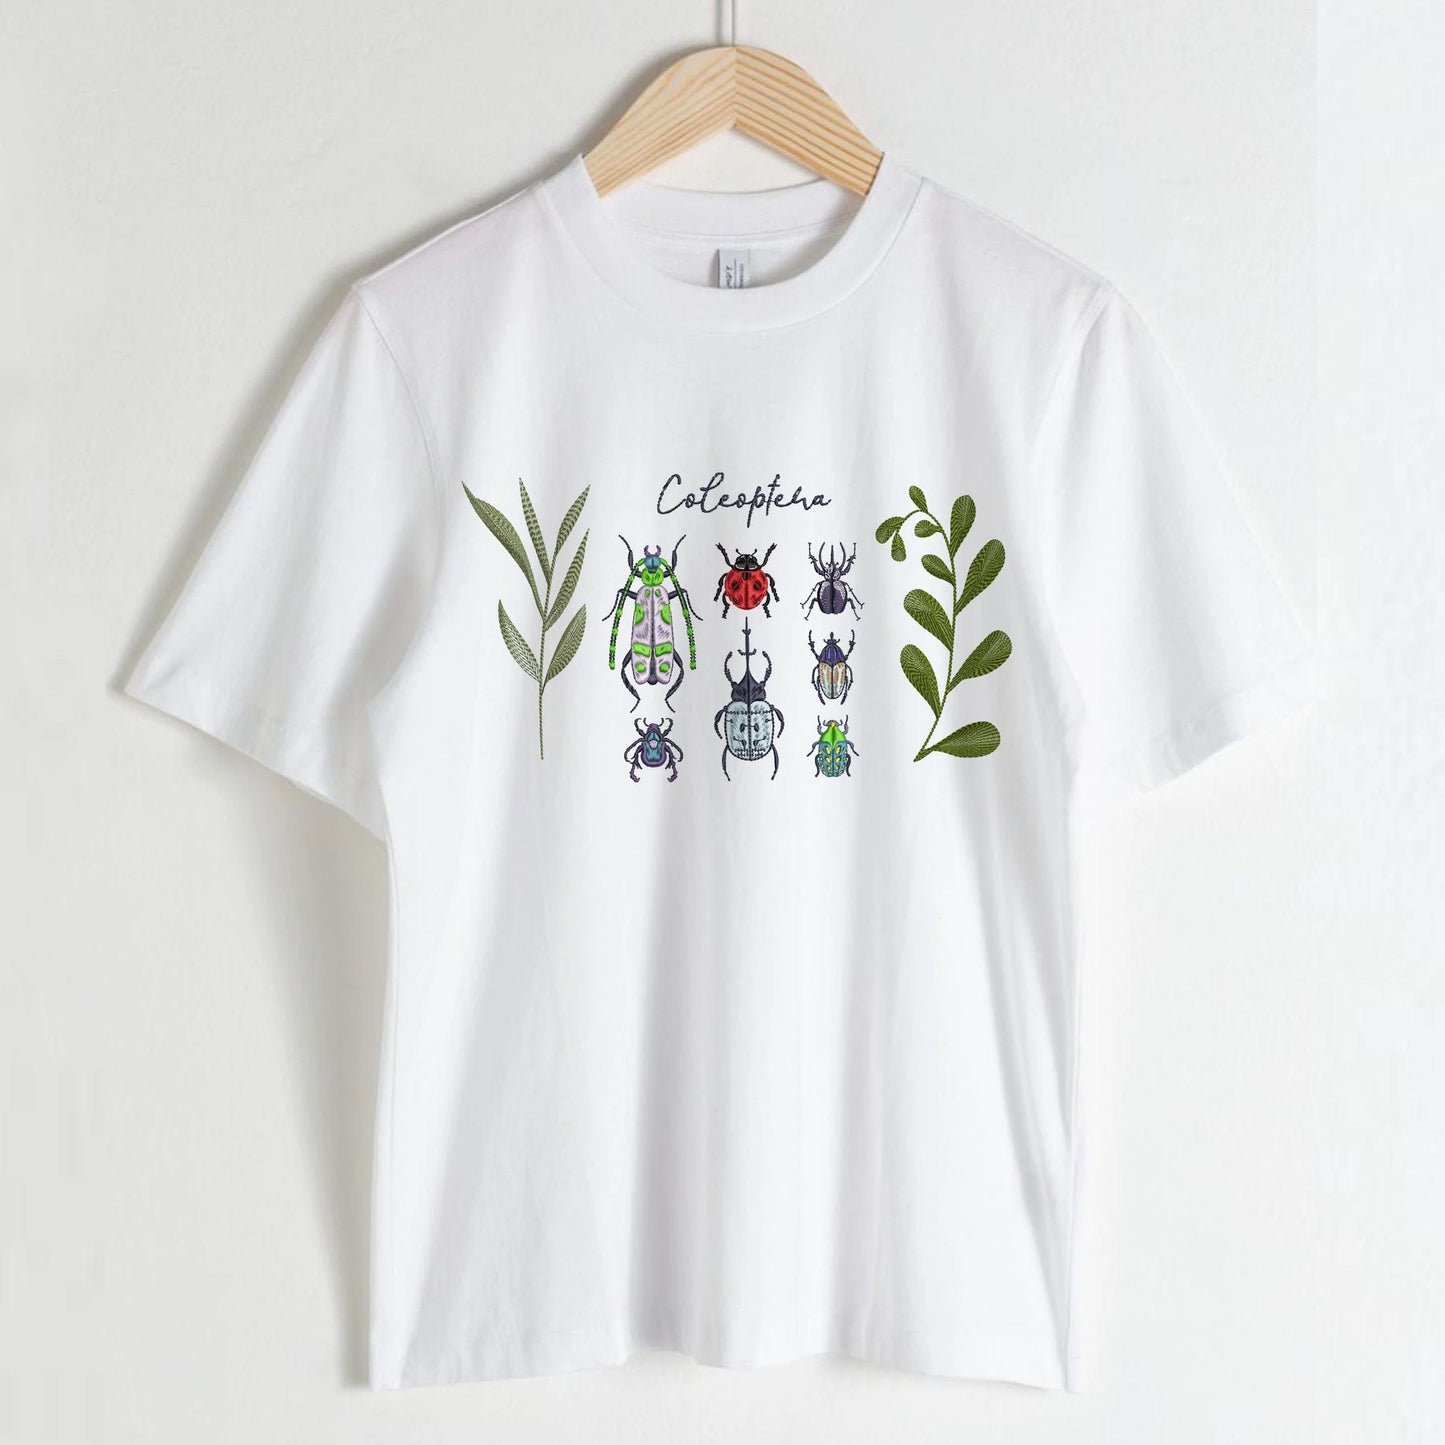 Beetle Insects Machine Embroidery Design on t-shirt